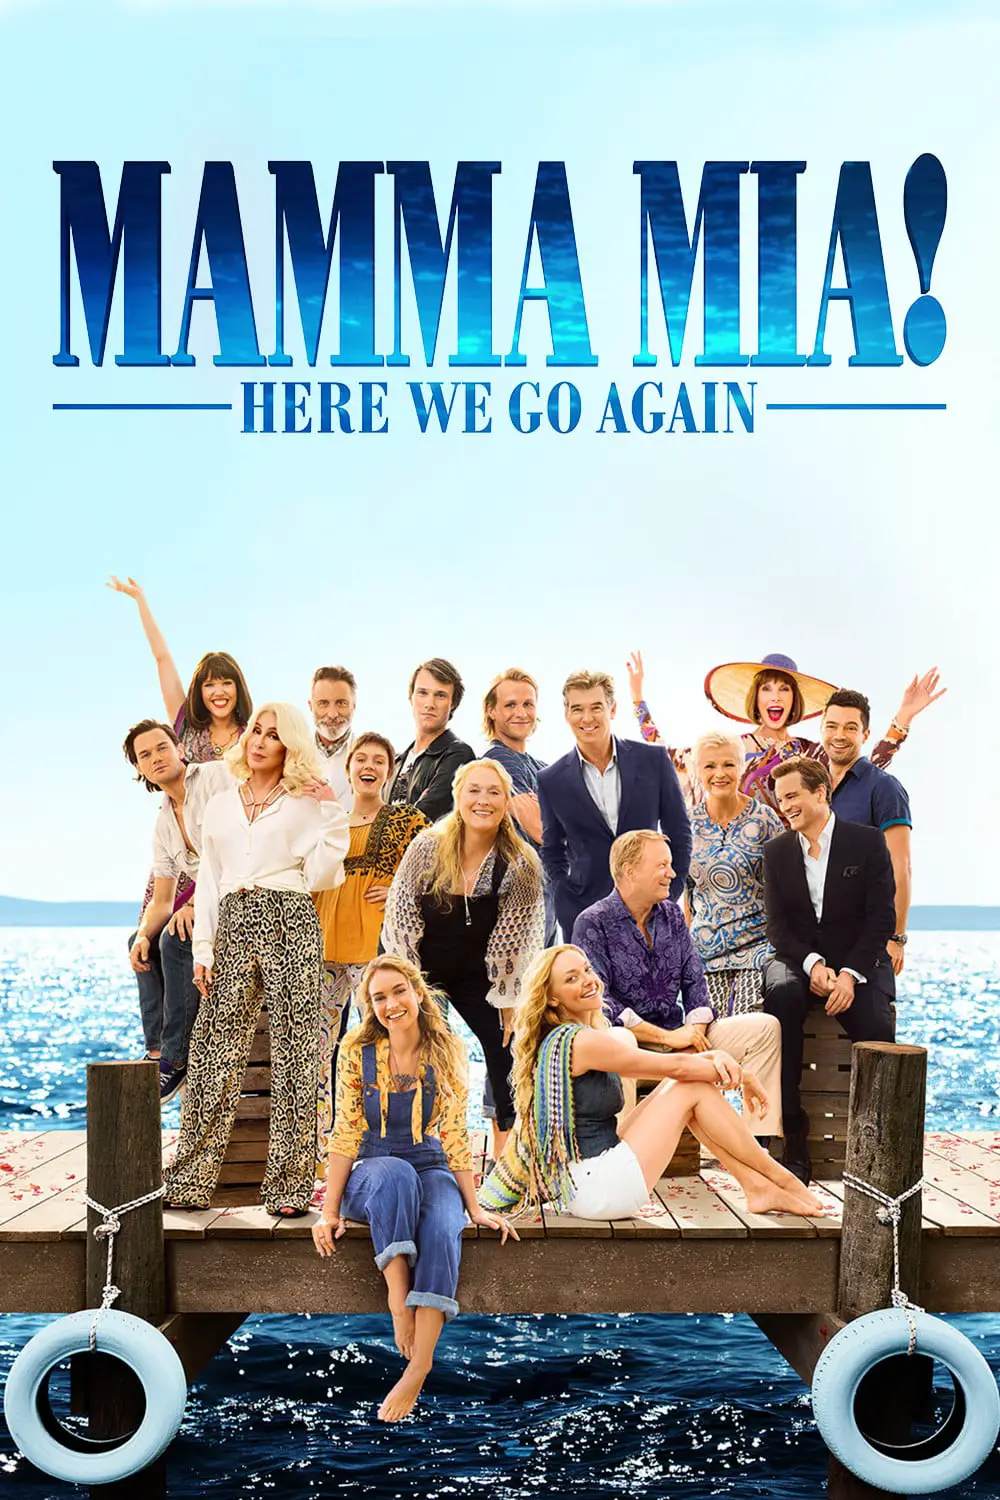 You are currently viewing Mamma Mia! Here We Go Again